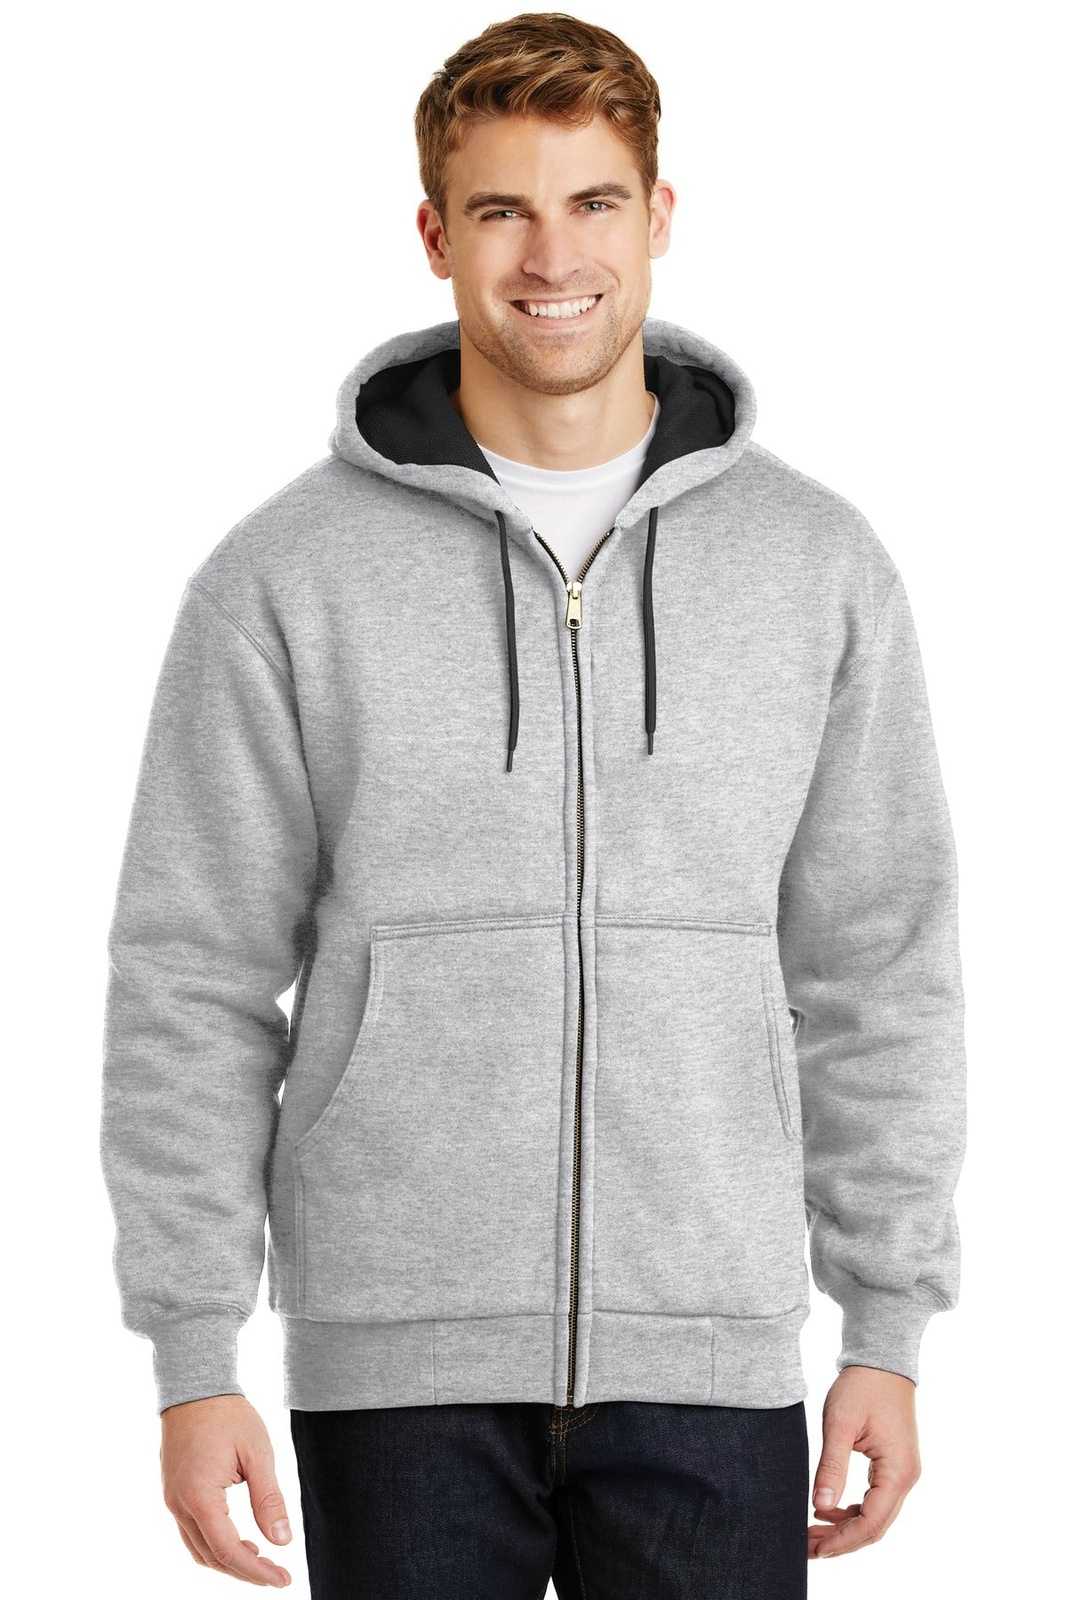 CornerStone CS620 Heavyweight Full-Zip Hooded Sweatshirt with Thermal Lining - Athletic Heather - HIT a Double - 1